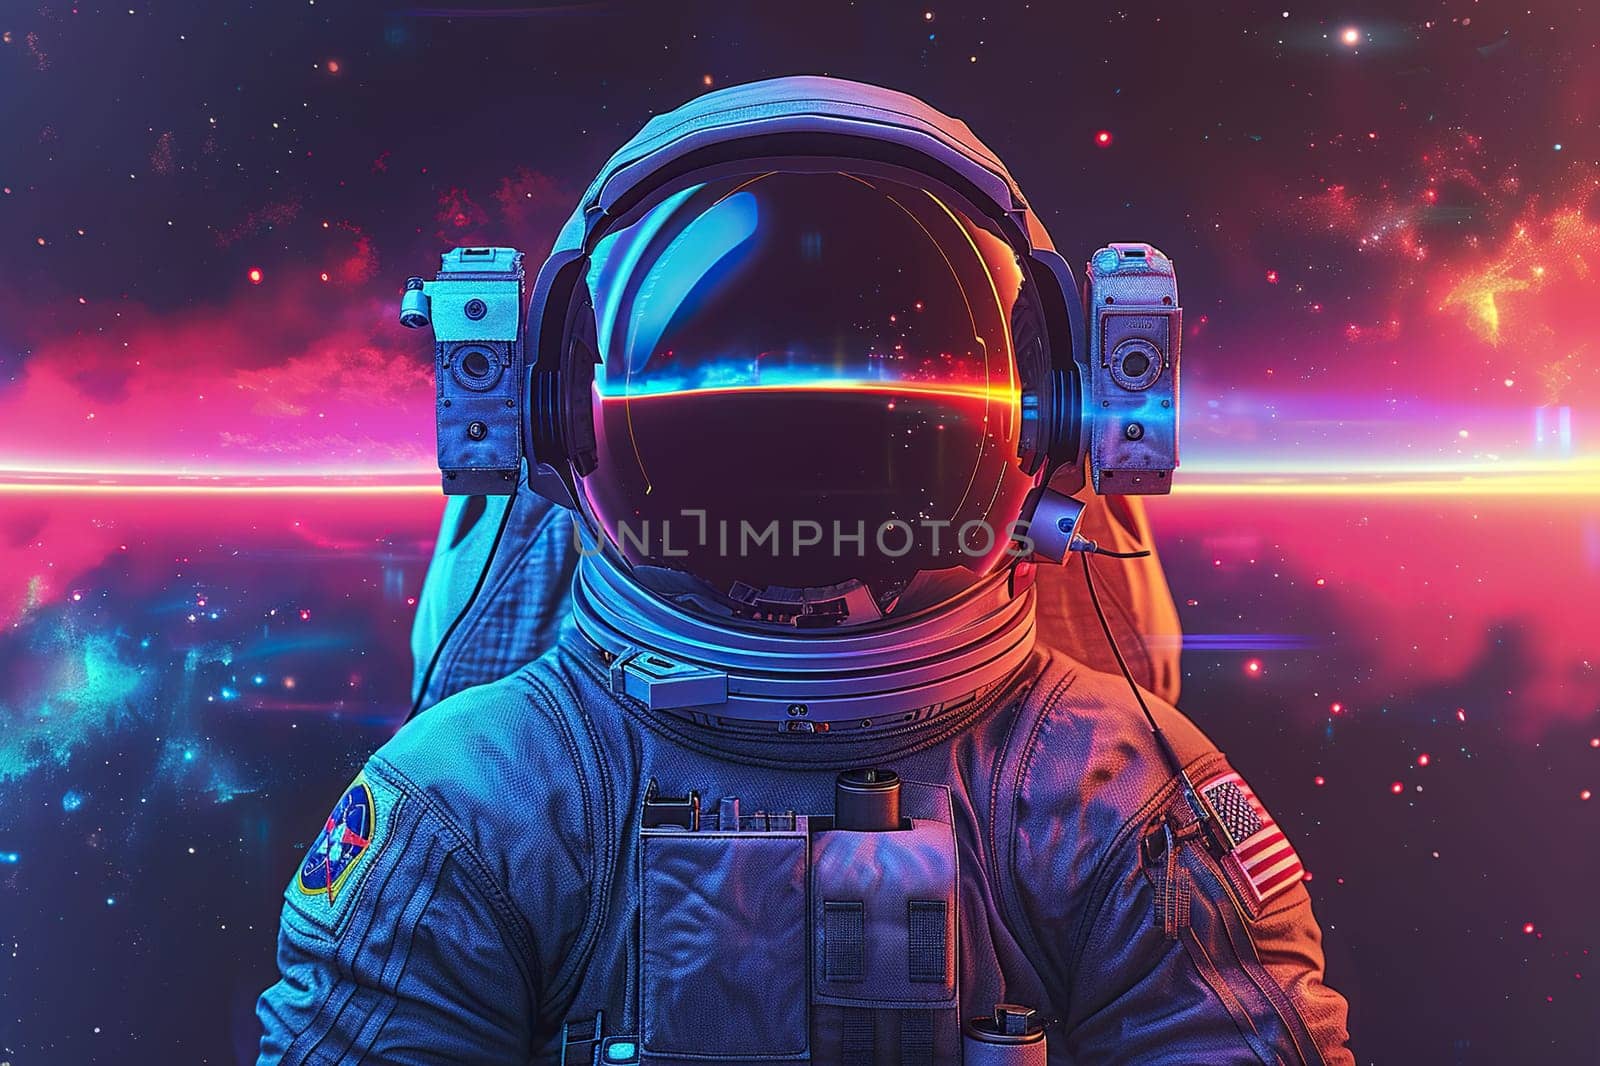 An astronaut in a spacesuit and large headphones against the backdrop of the universe. Generated by artificial intelligence by Vovmar